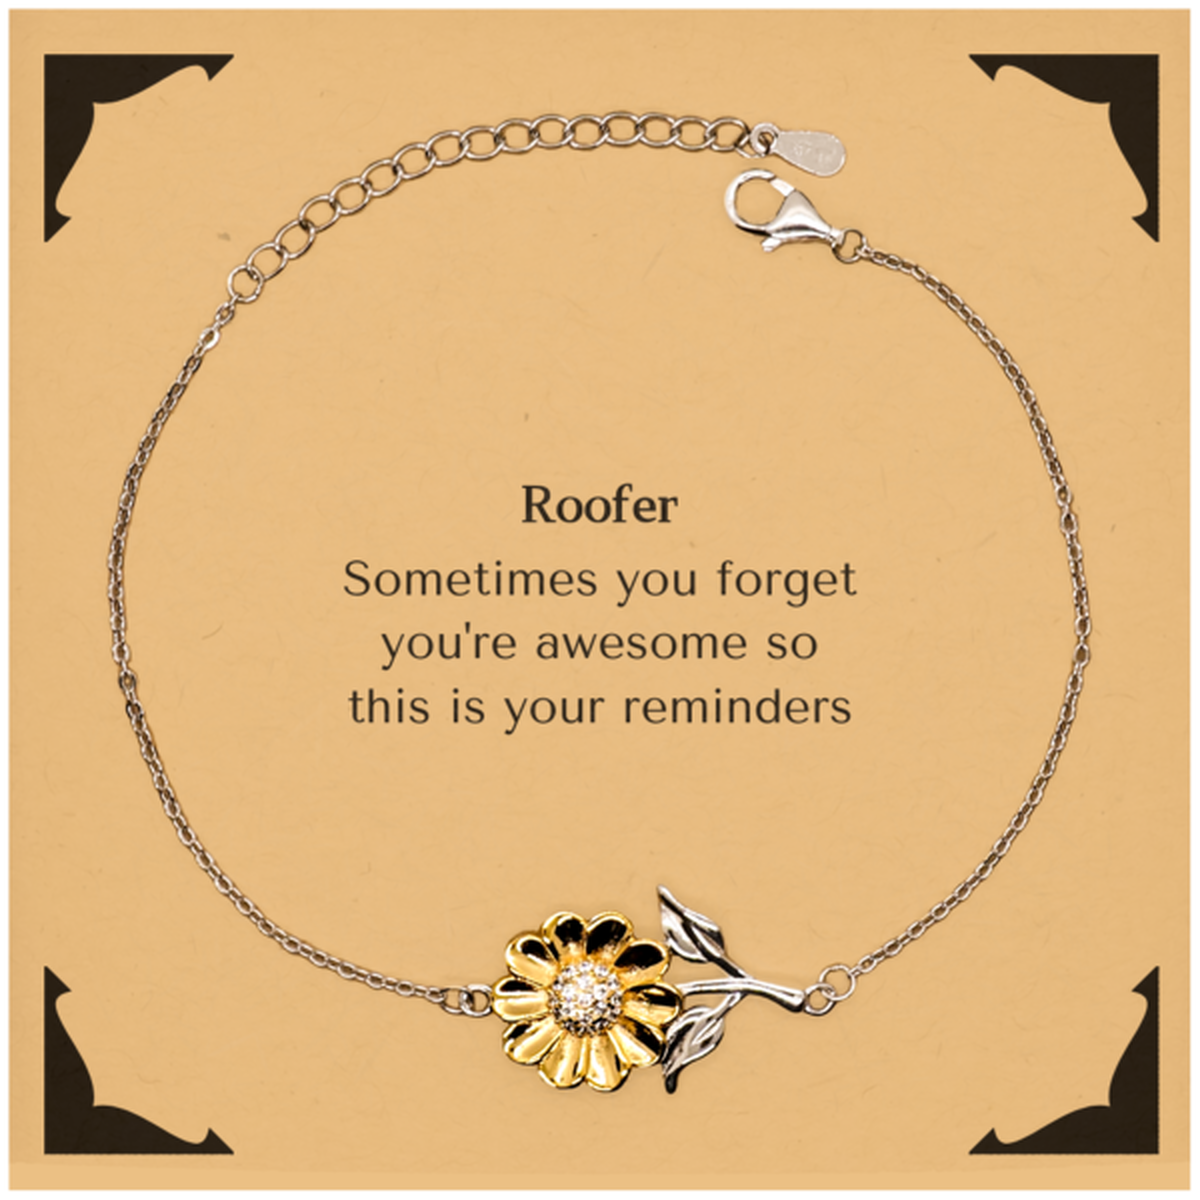 Sentimental Roofer Sunflower Bracelet, Roofer Sometimes you forget you're awesome so this is your reminders, Graduation Christmas Birthday Gifts for Roofer, Men, Women, Coworkers